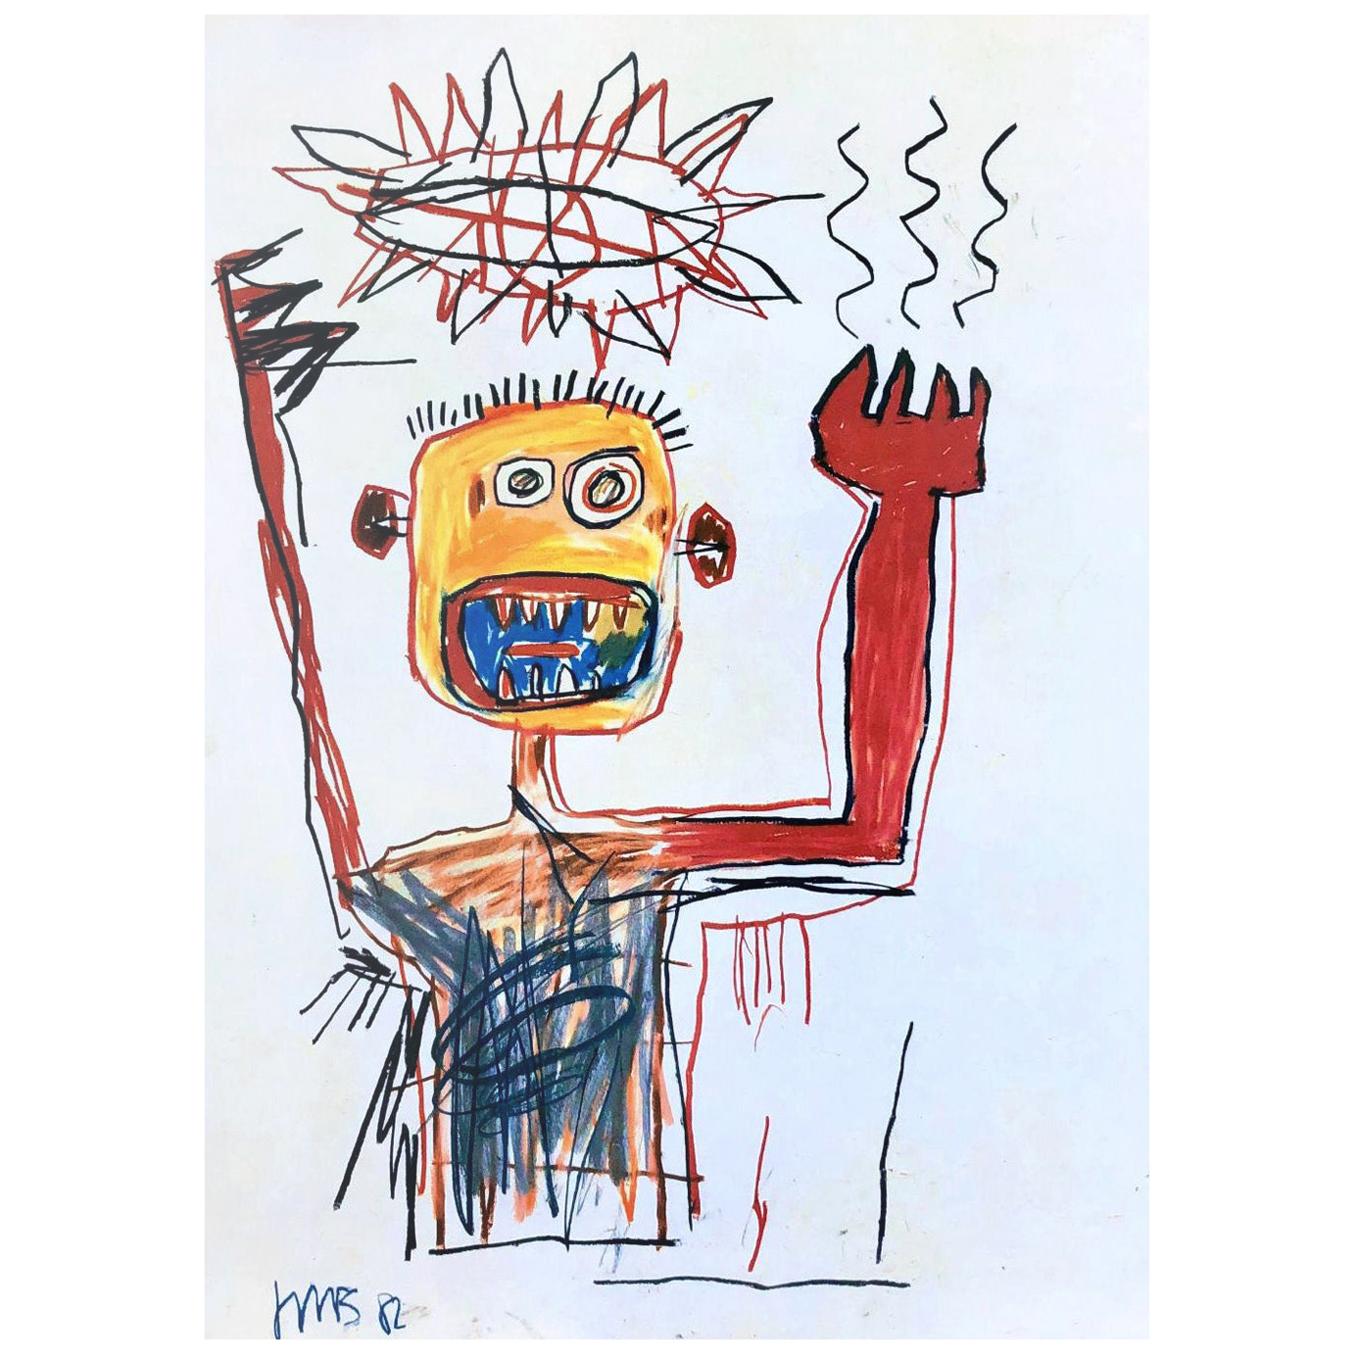 Basquiat Gallery Announcement Cards, 'Set of 2'